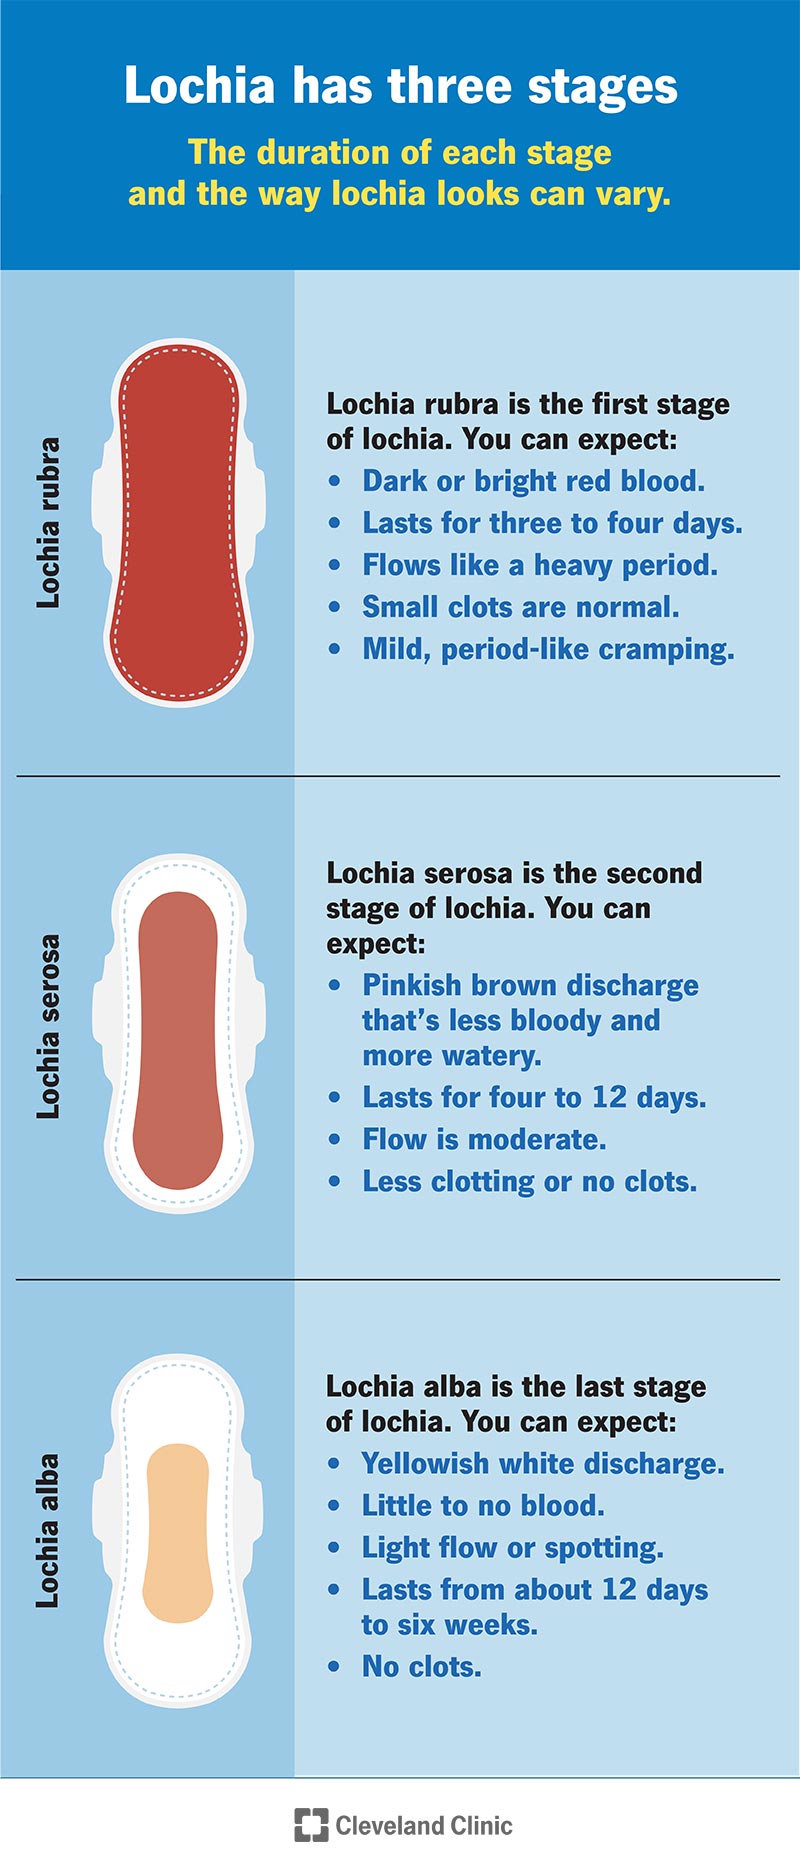 Three stages of lochia, what it looks like and what to expect at each stage.